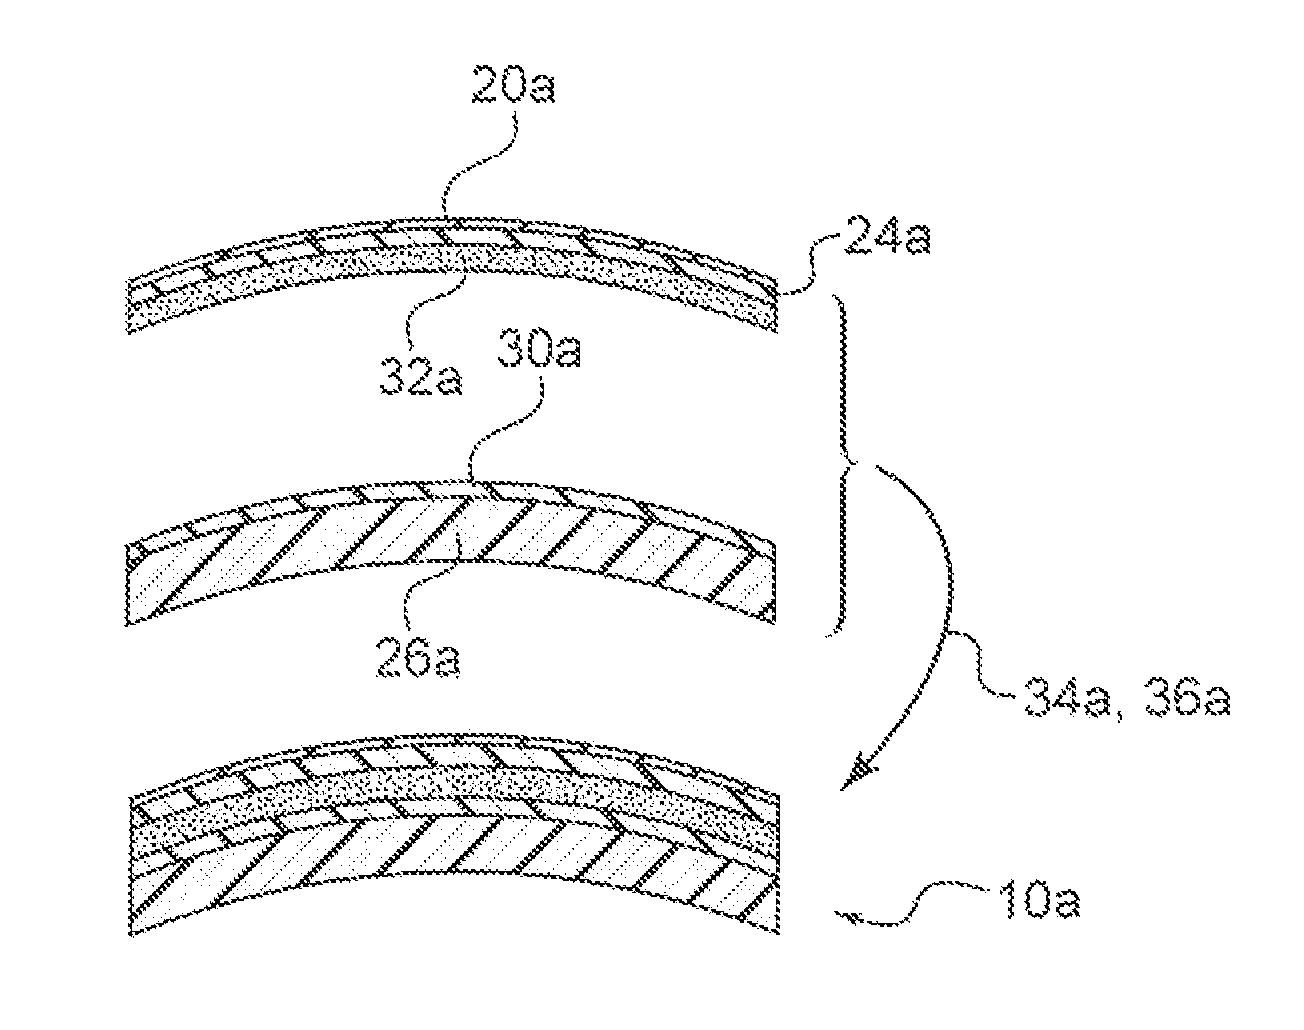 Adhesive system for a laminated lens and method for applying same